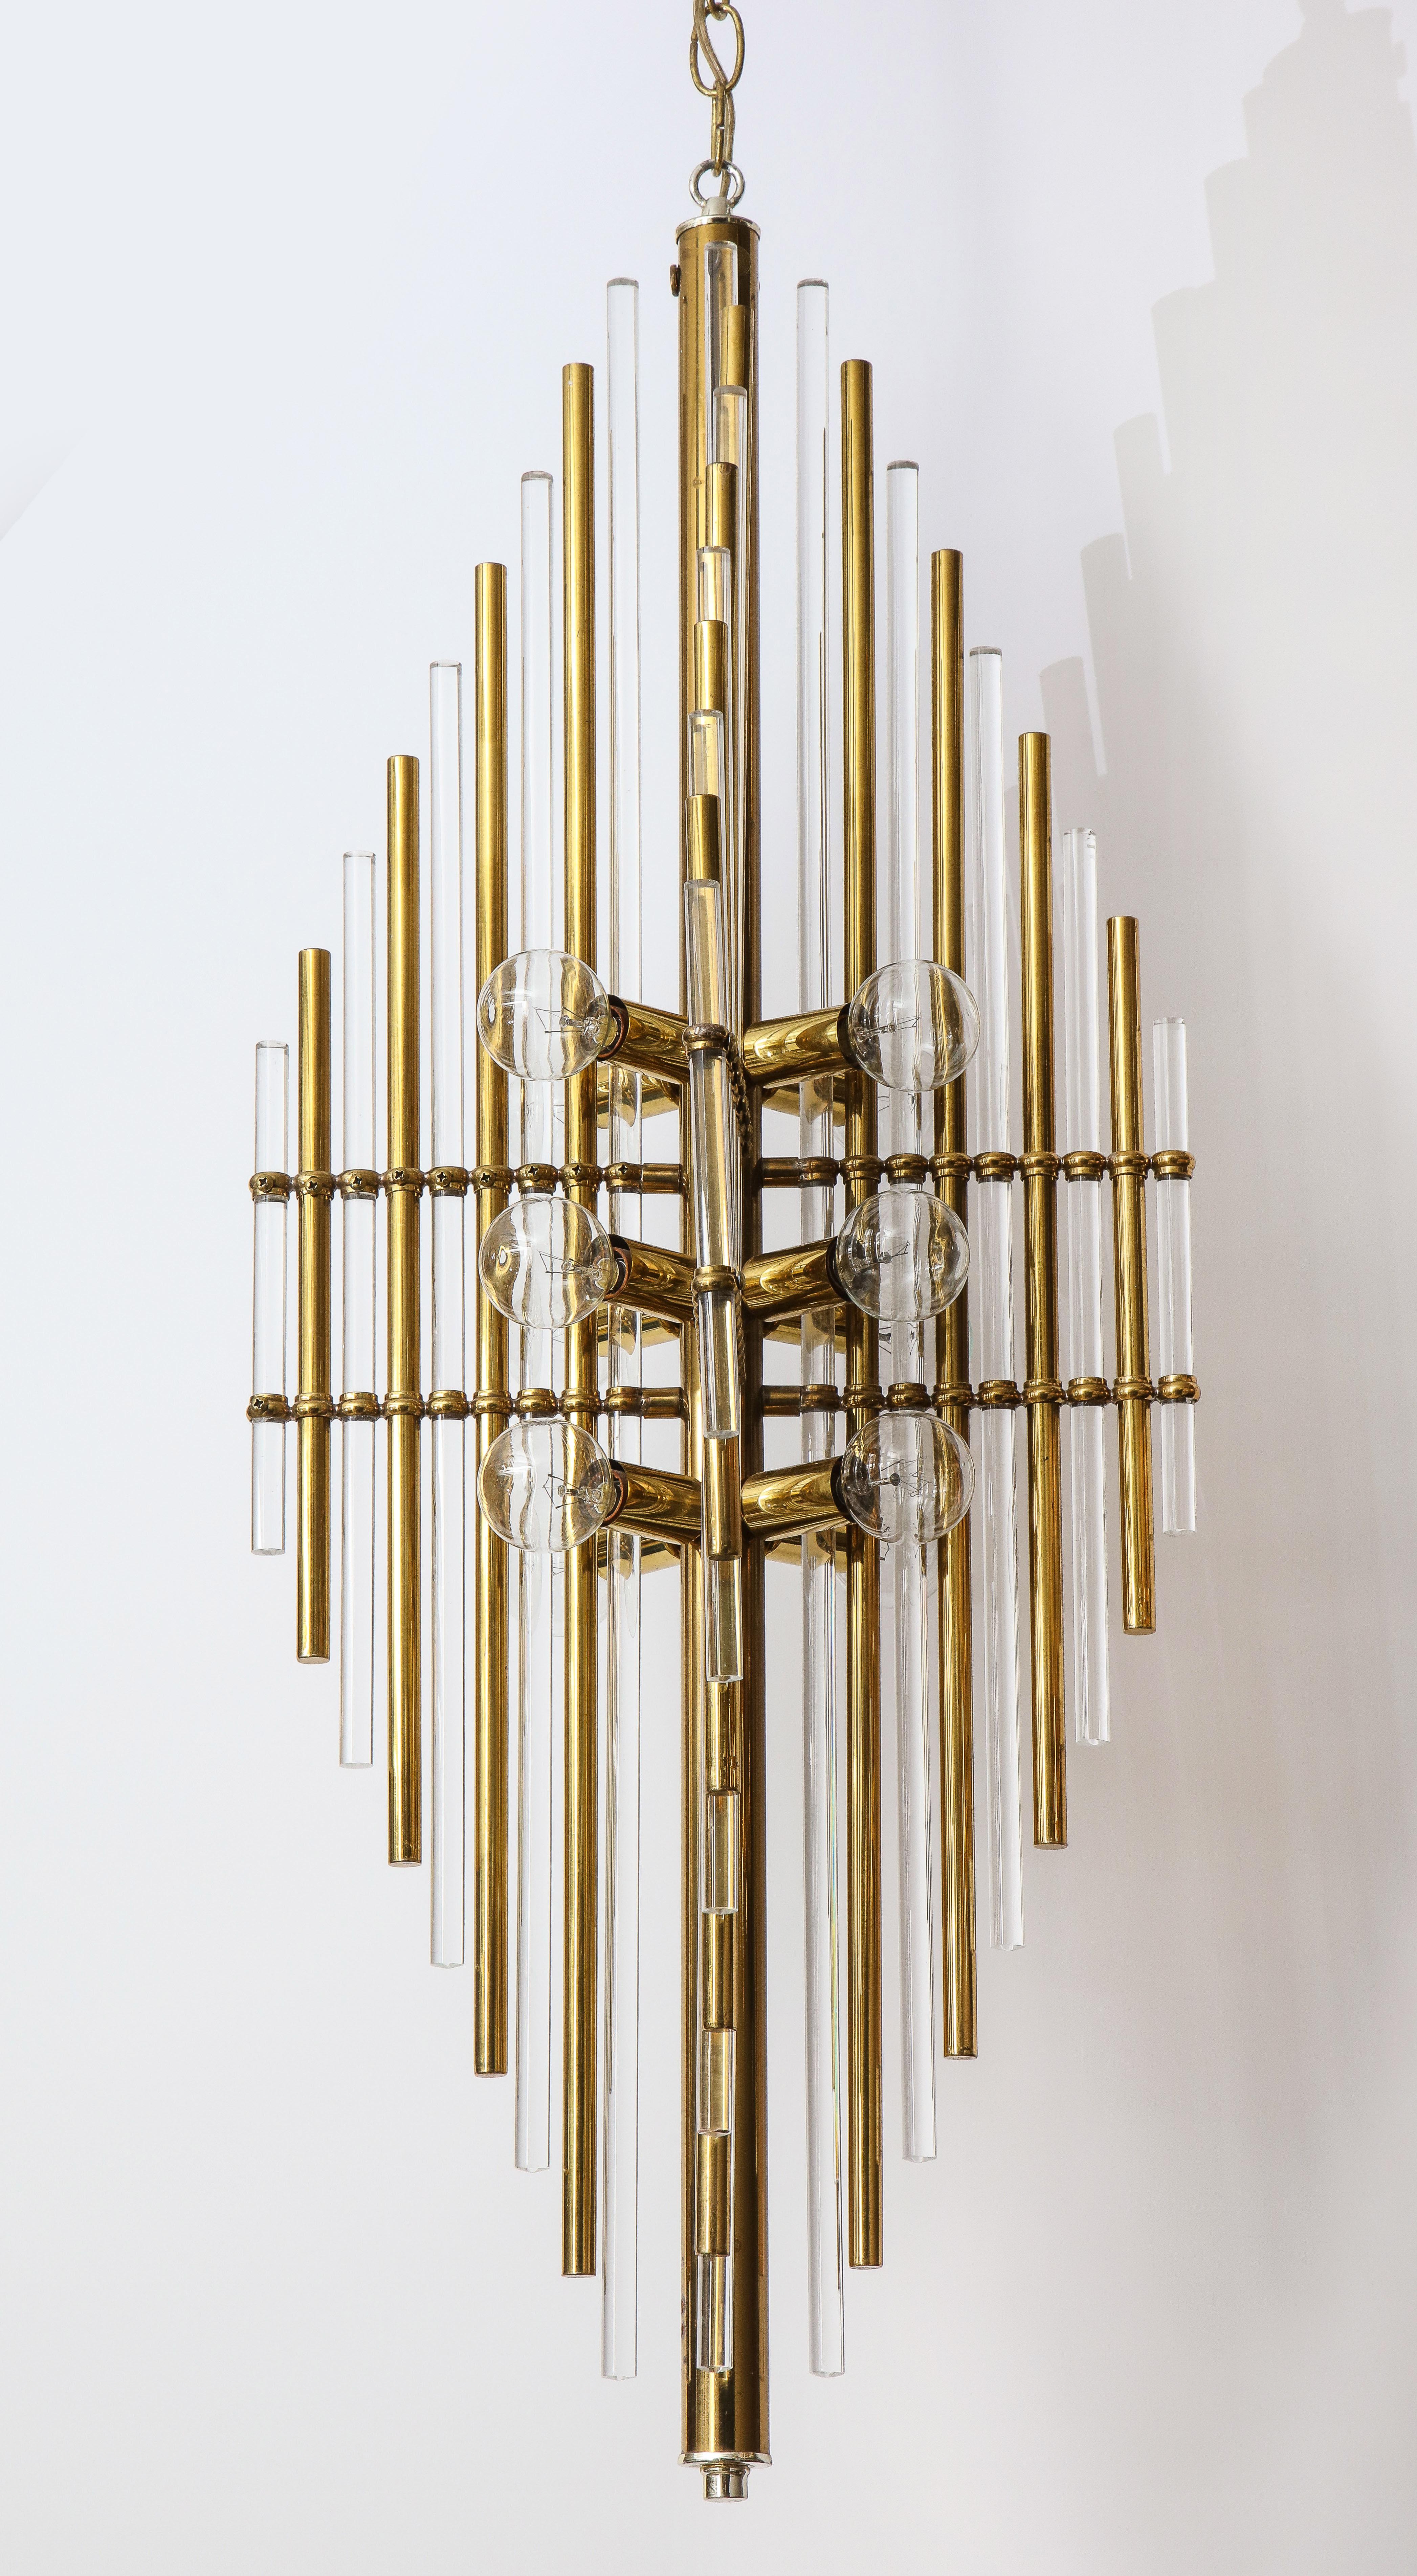 Midcentury 4 panel pendant, composed of alternating brass and Lucite dowels. Contains 12 sockets, using candelabra type bulb base. Comes with brass chain and canopy. 43